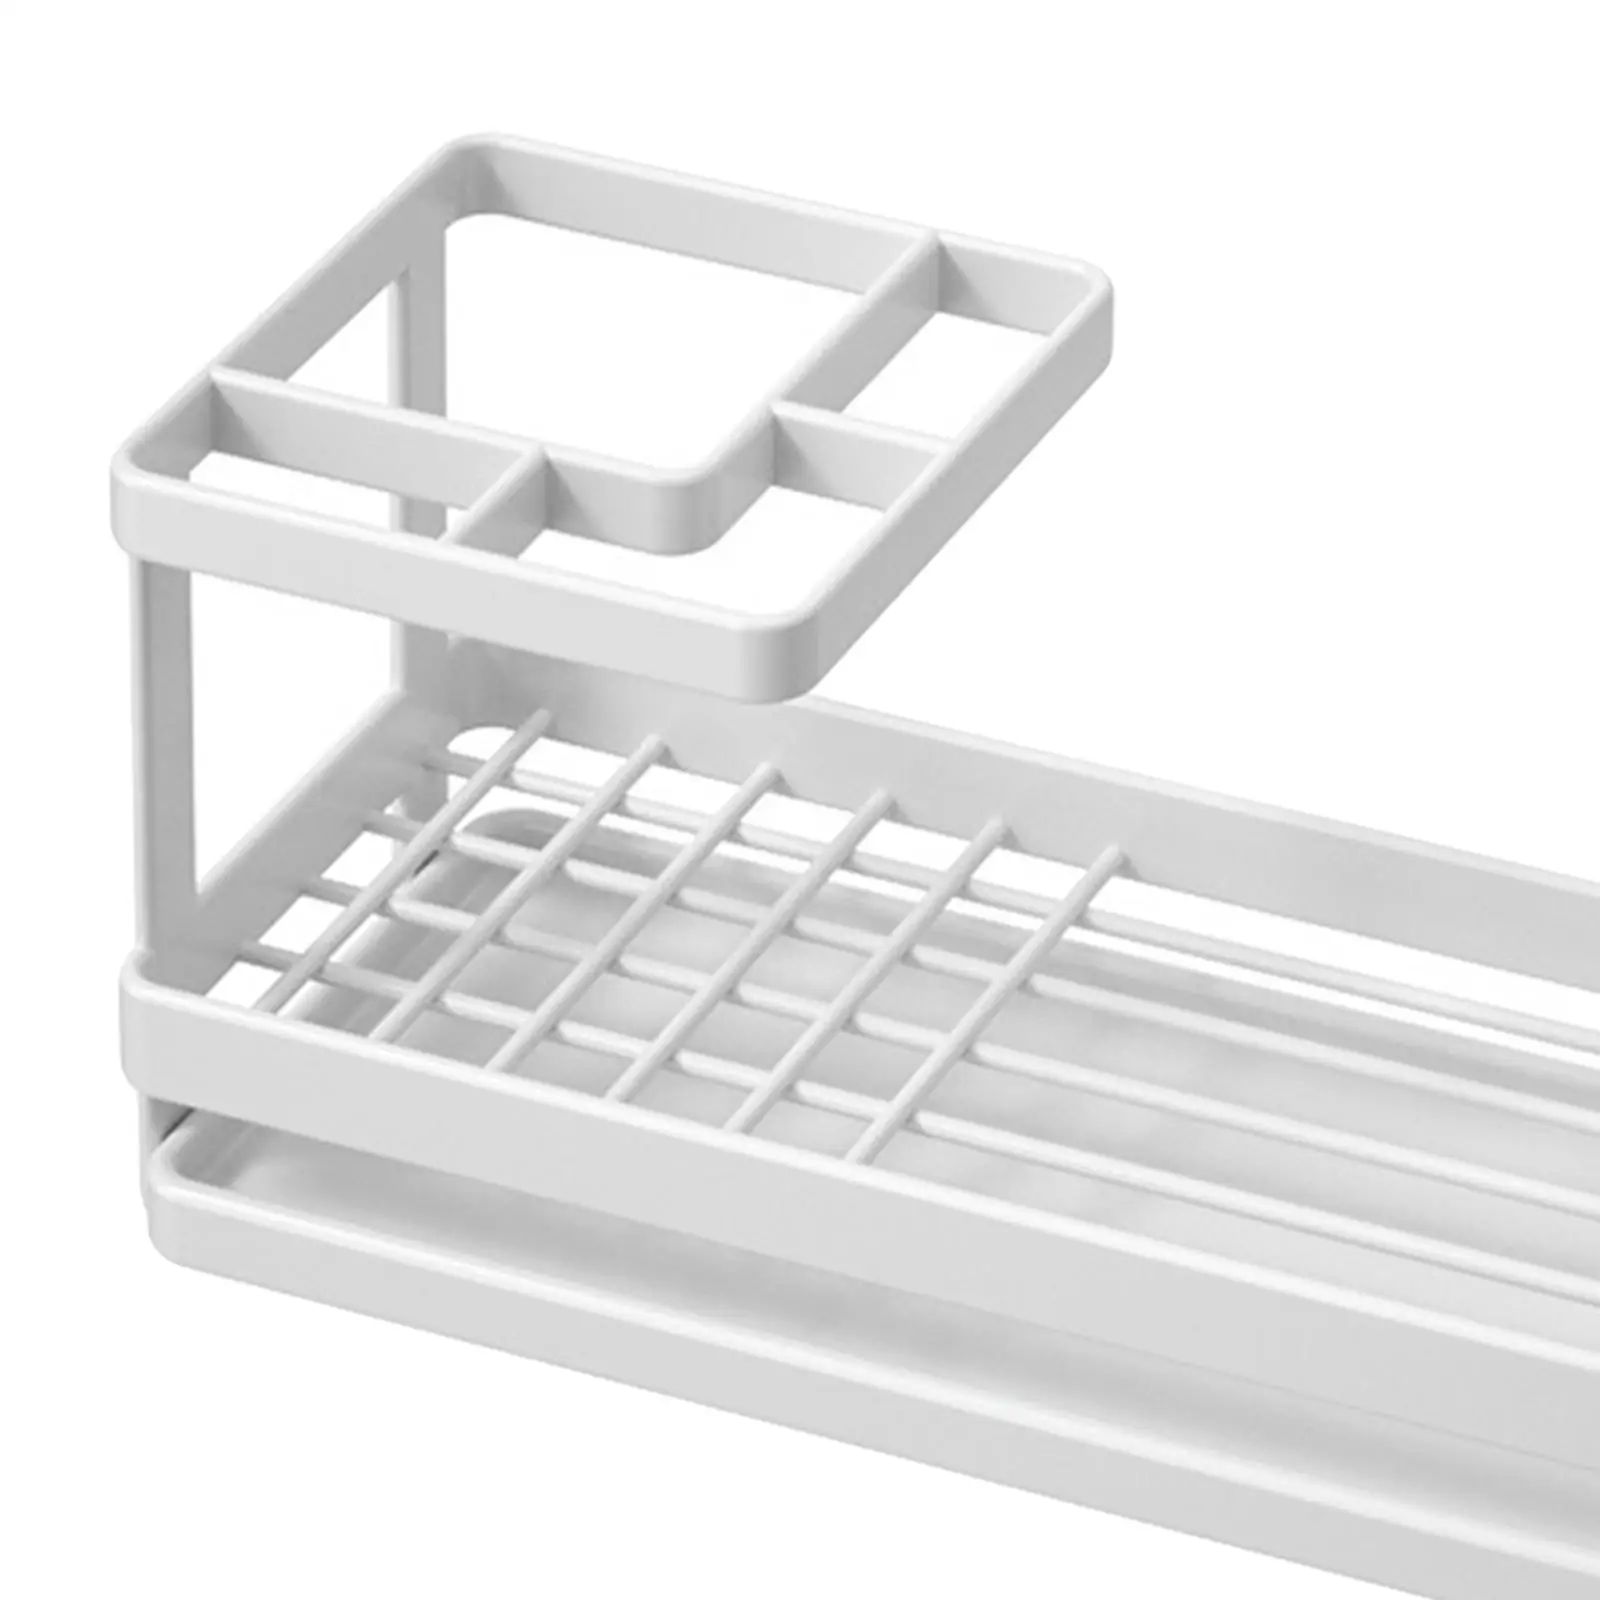 Countertop Toothpaste Dispenser ,Toothpaste Caddy with Drain Tray, Bathroom Tray Caddy ,Toothbrush Holder for Household